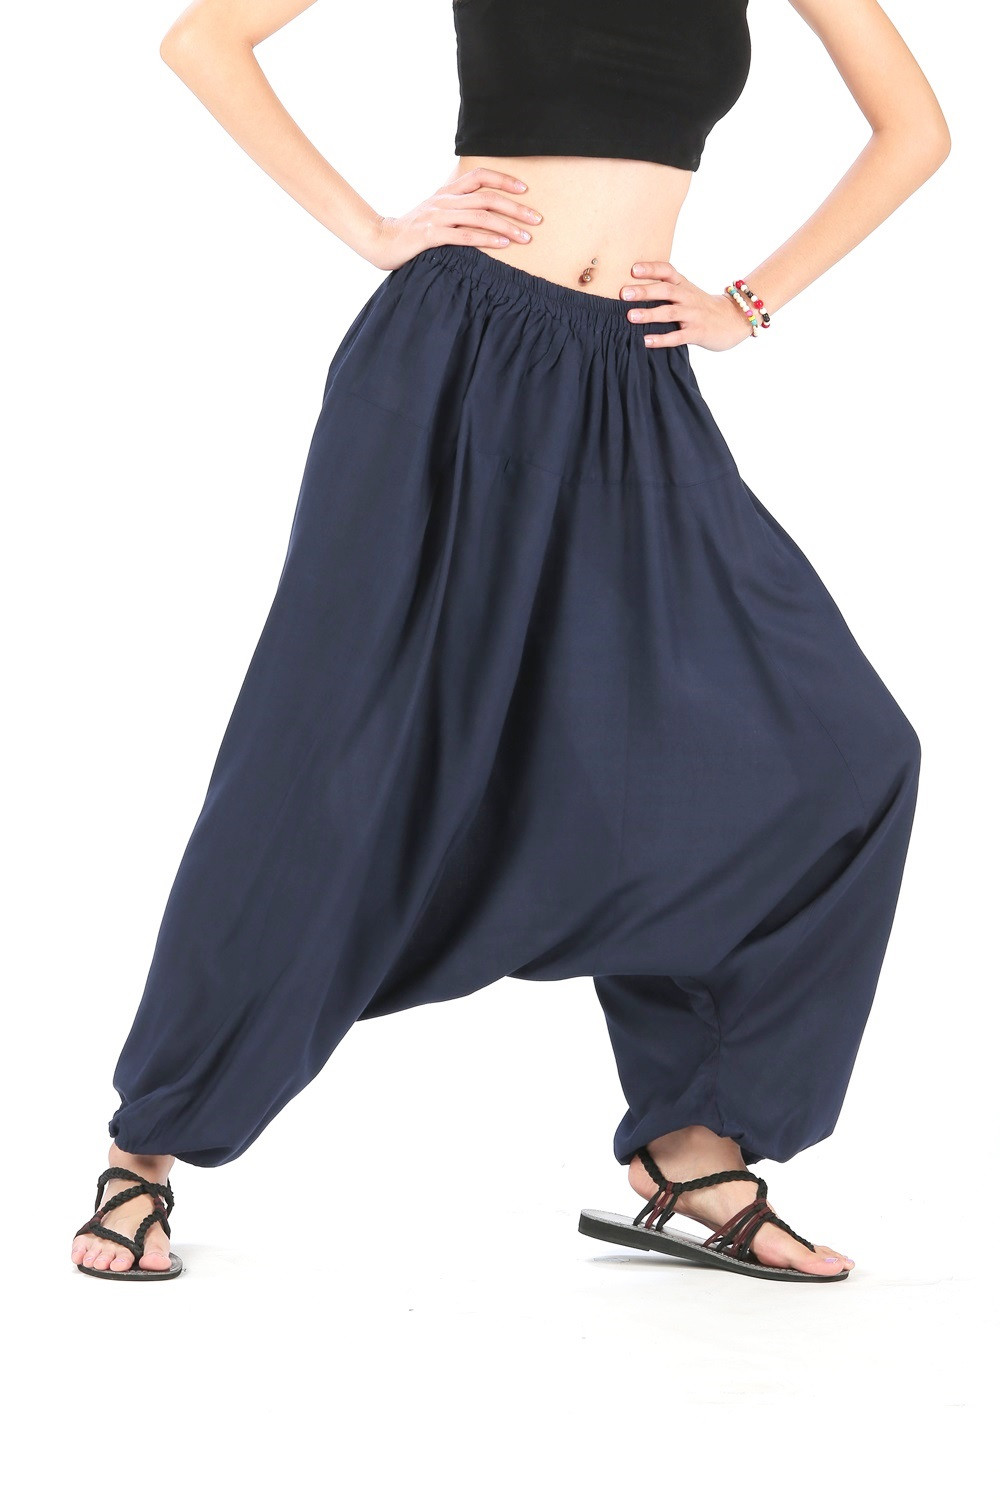 Buy Rayon Blue Harem Pants for Women Online @ ₹499 from ShopClues